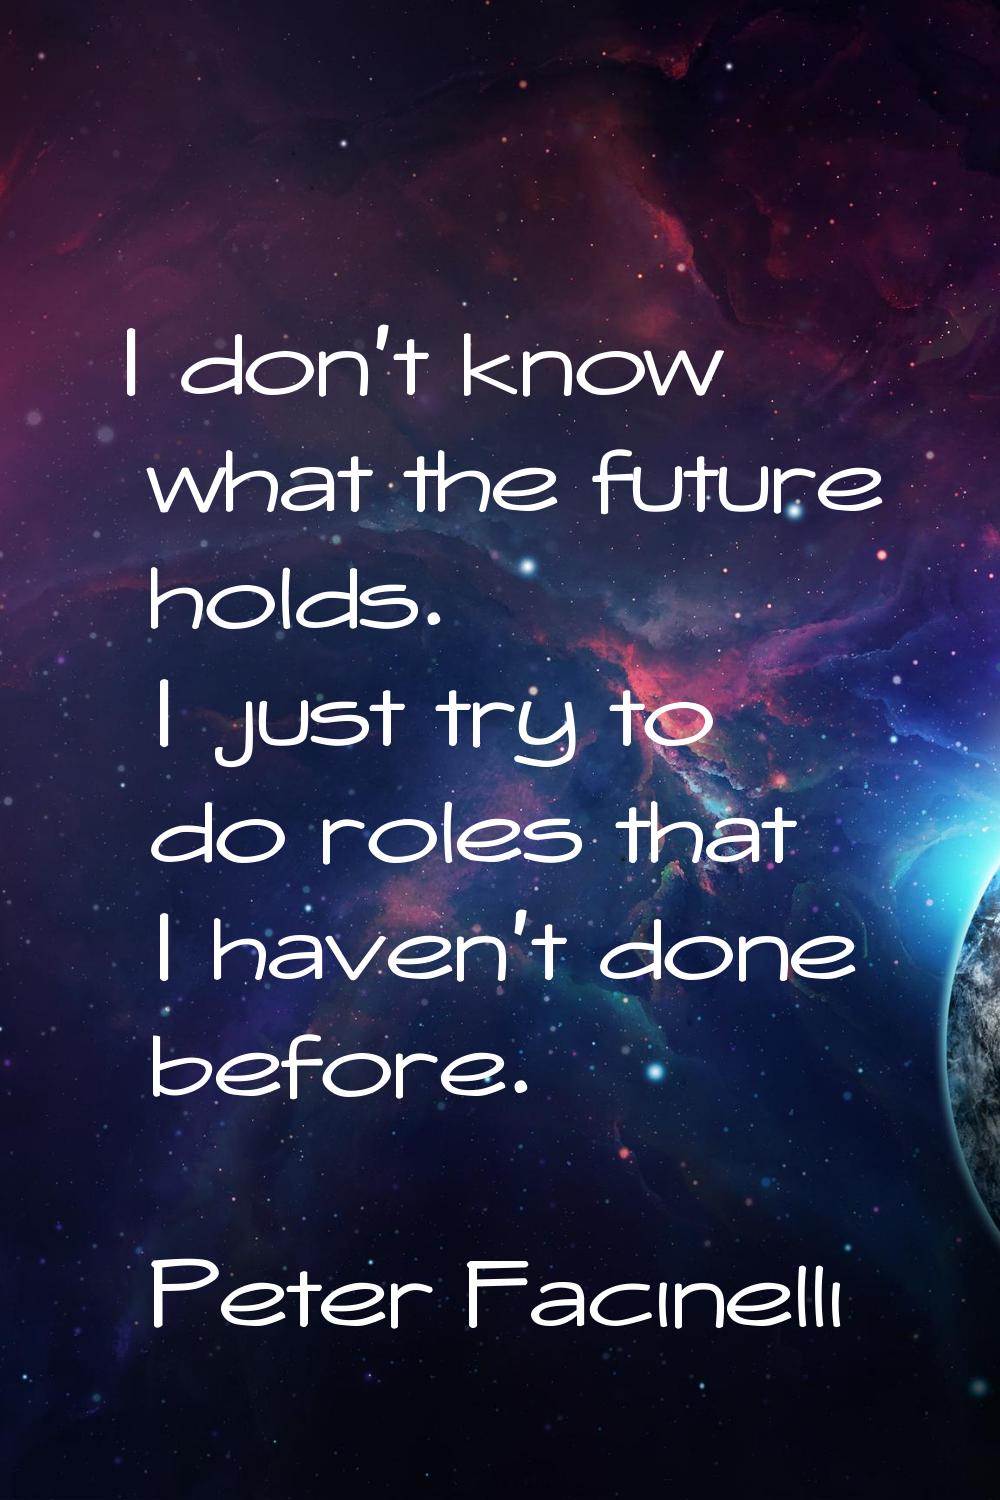 I don't know what the future holds. I just try to do roles that I haven't done before.